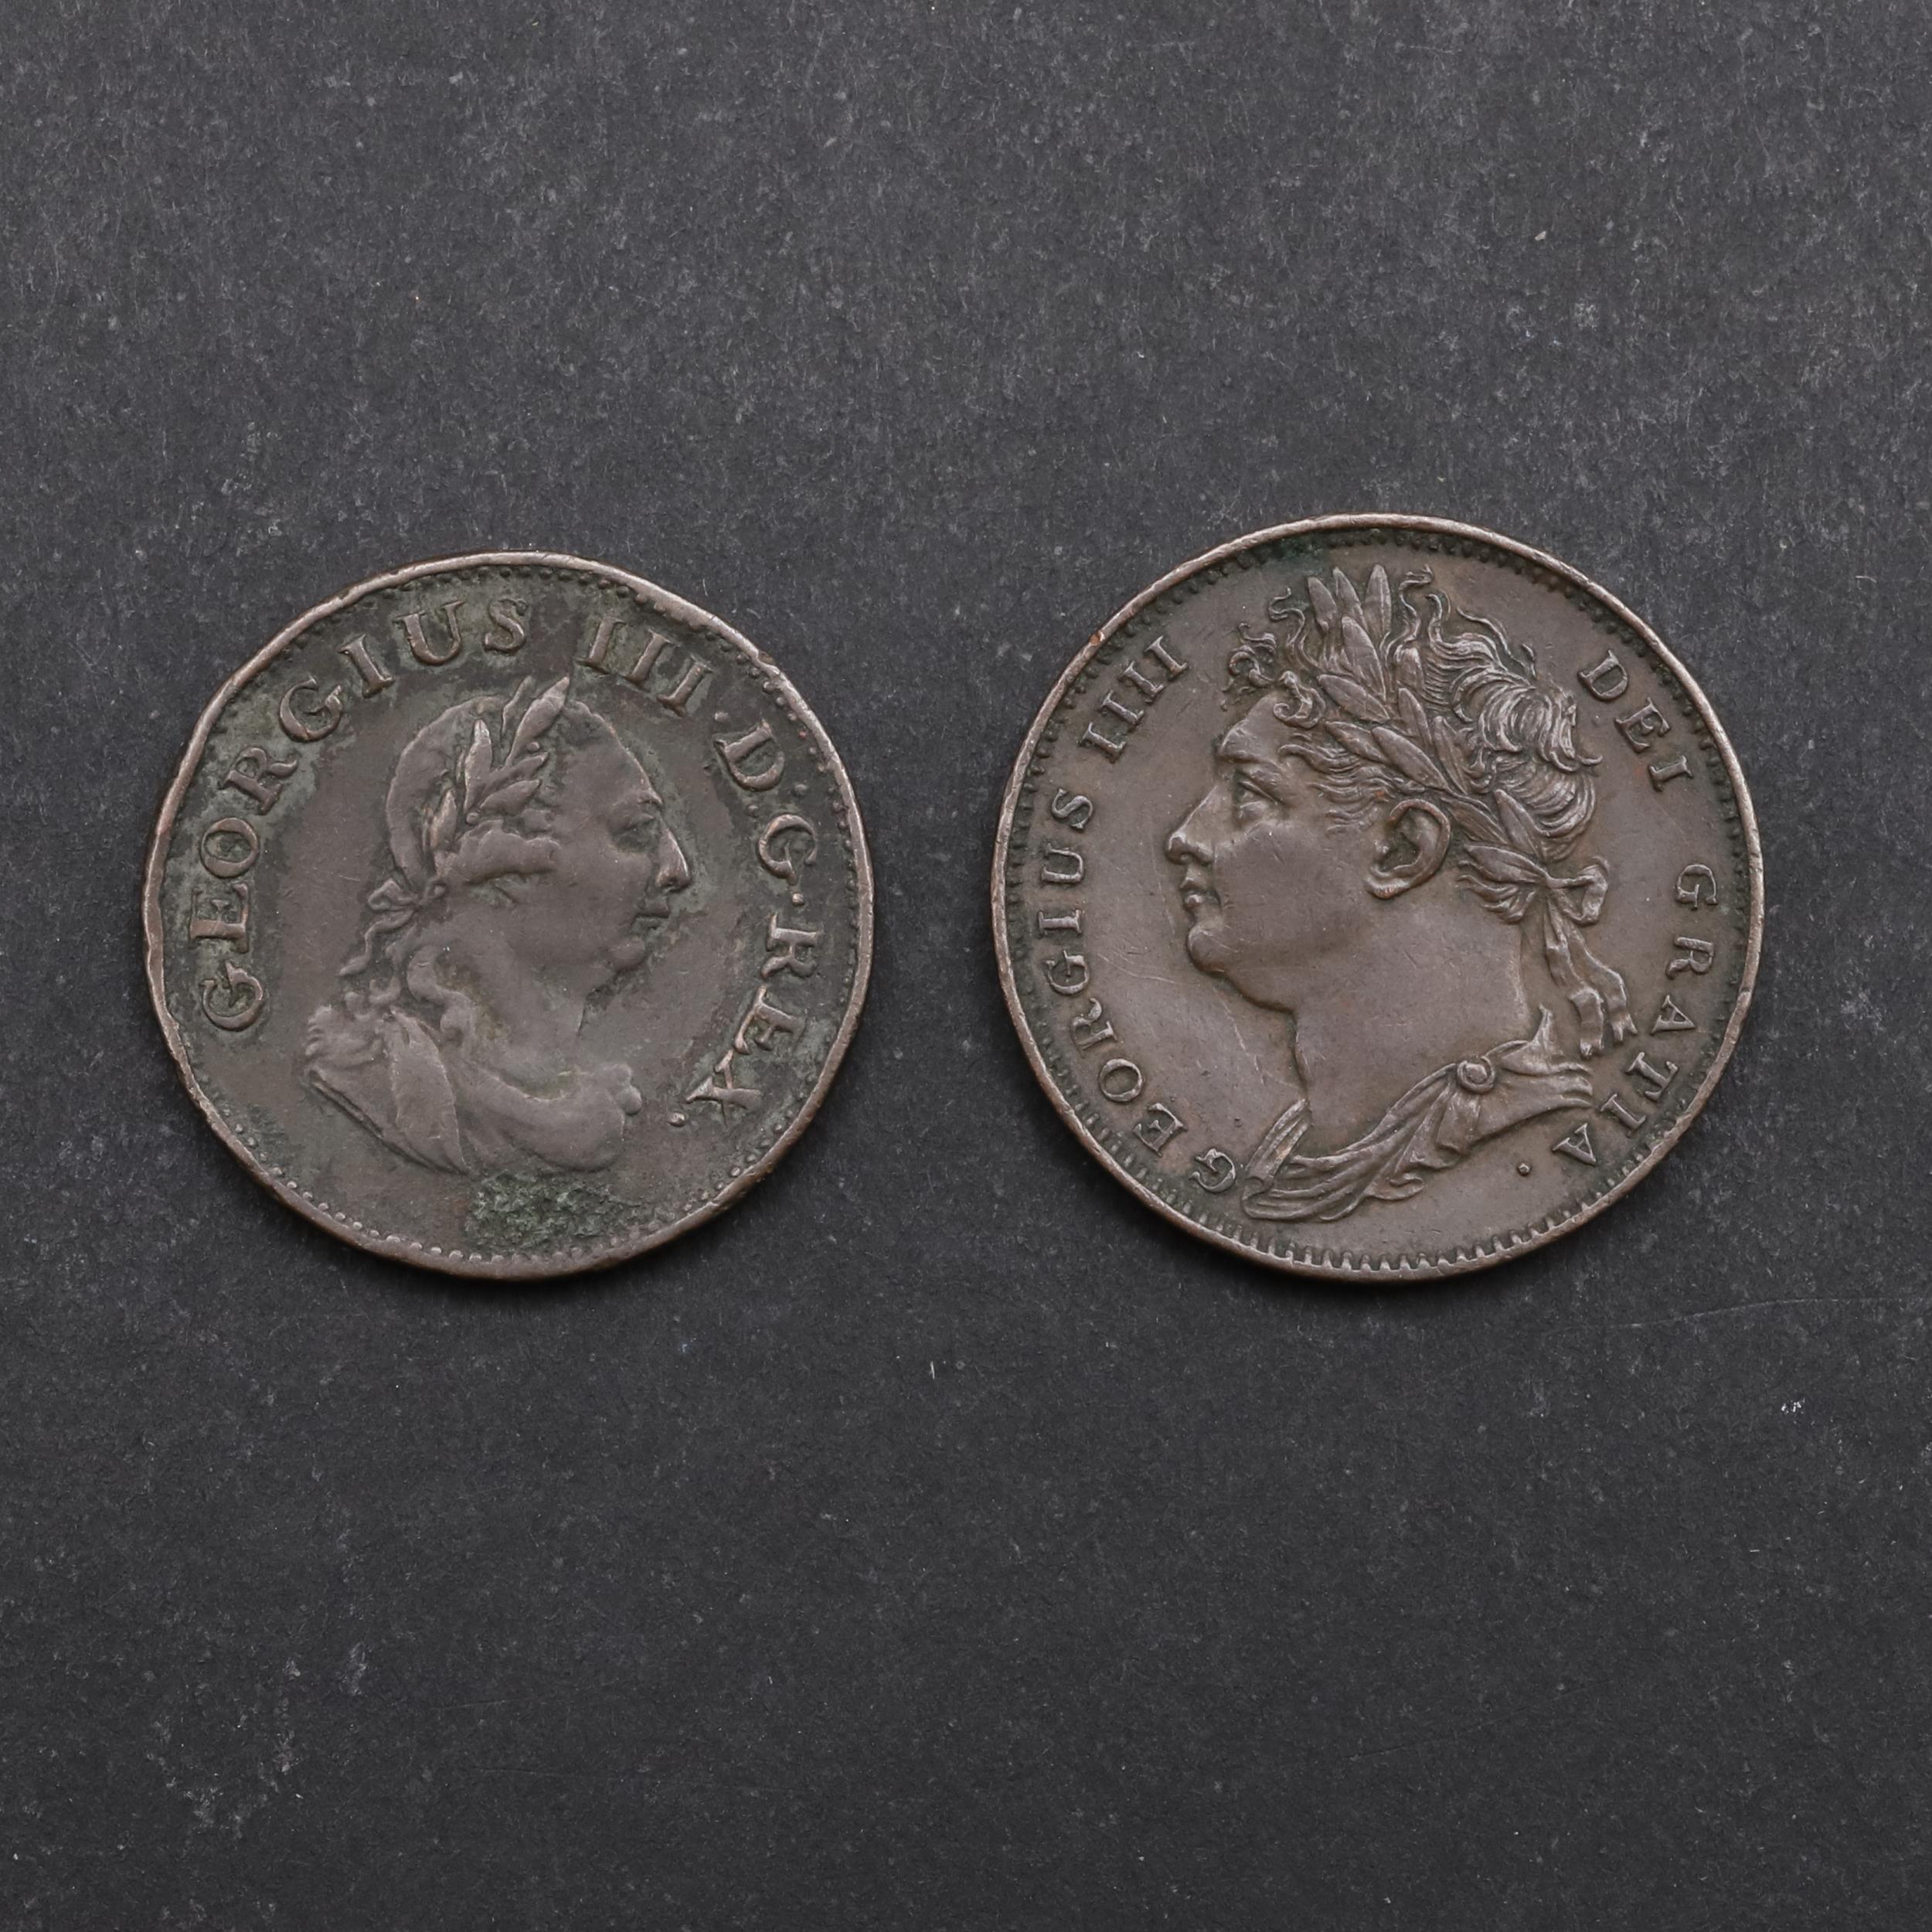 GEORGE III AND GEORGE IV FARTHINGS, 1806 AND 1822.